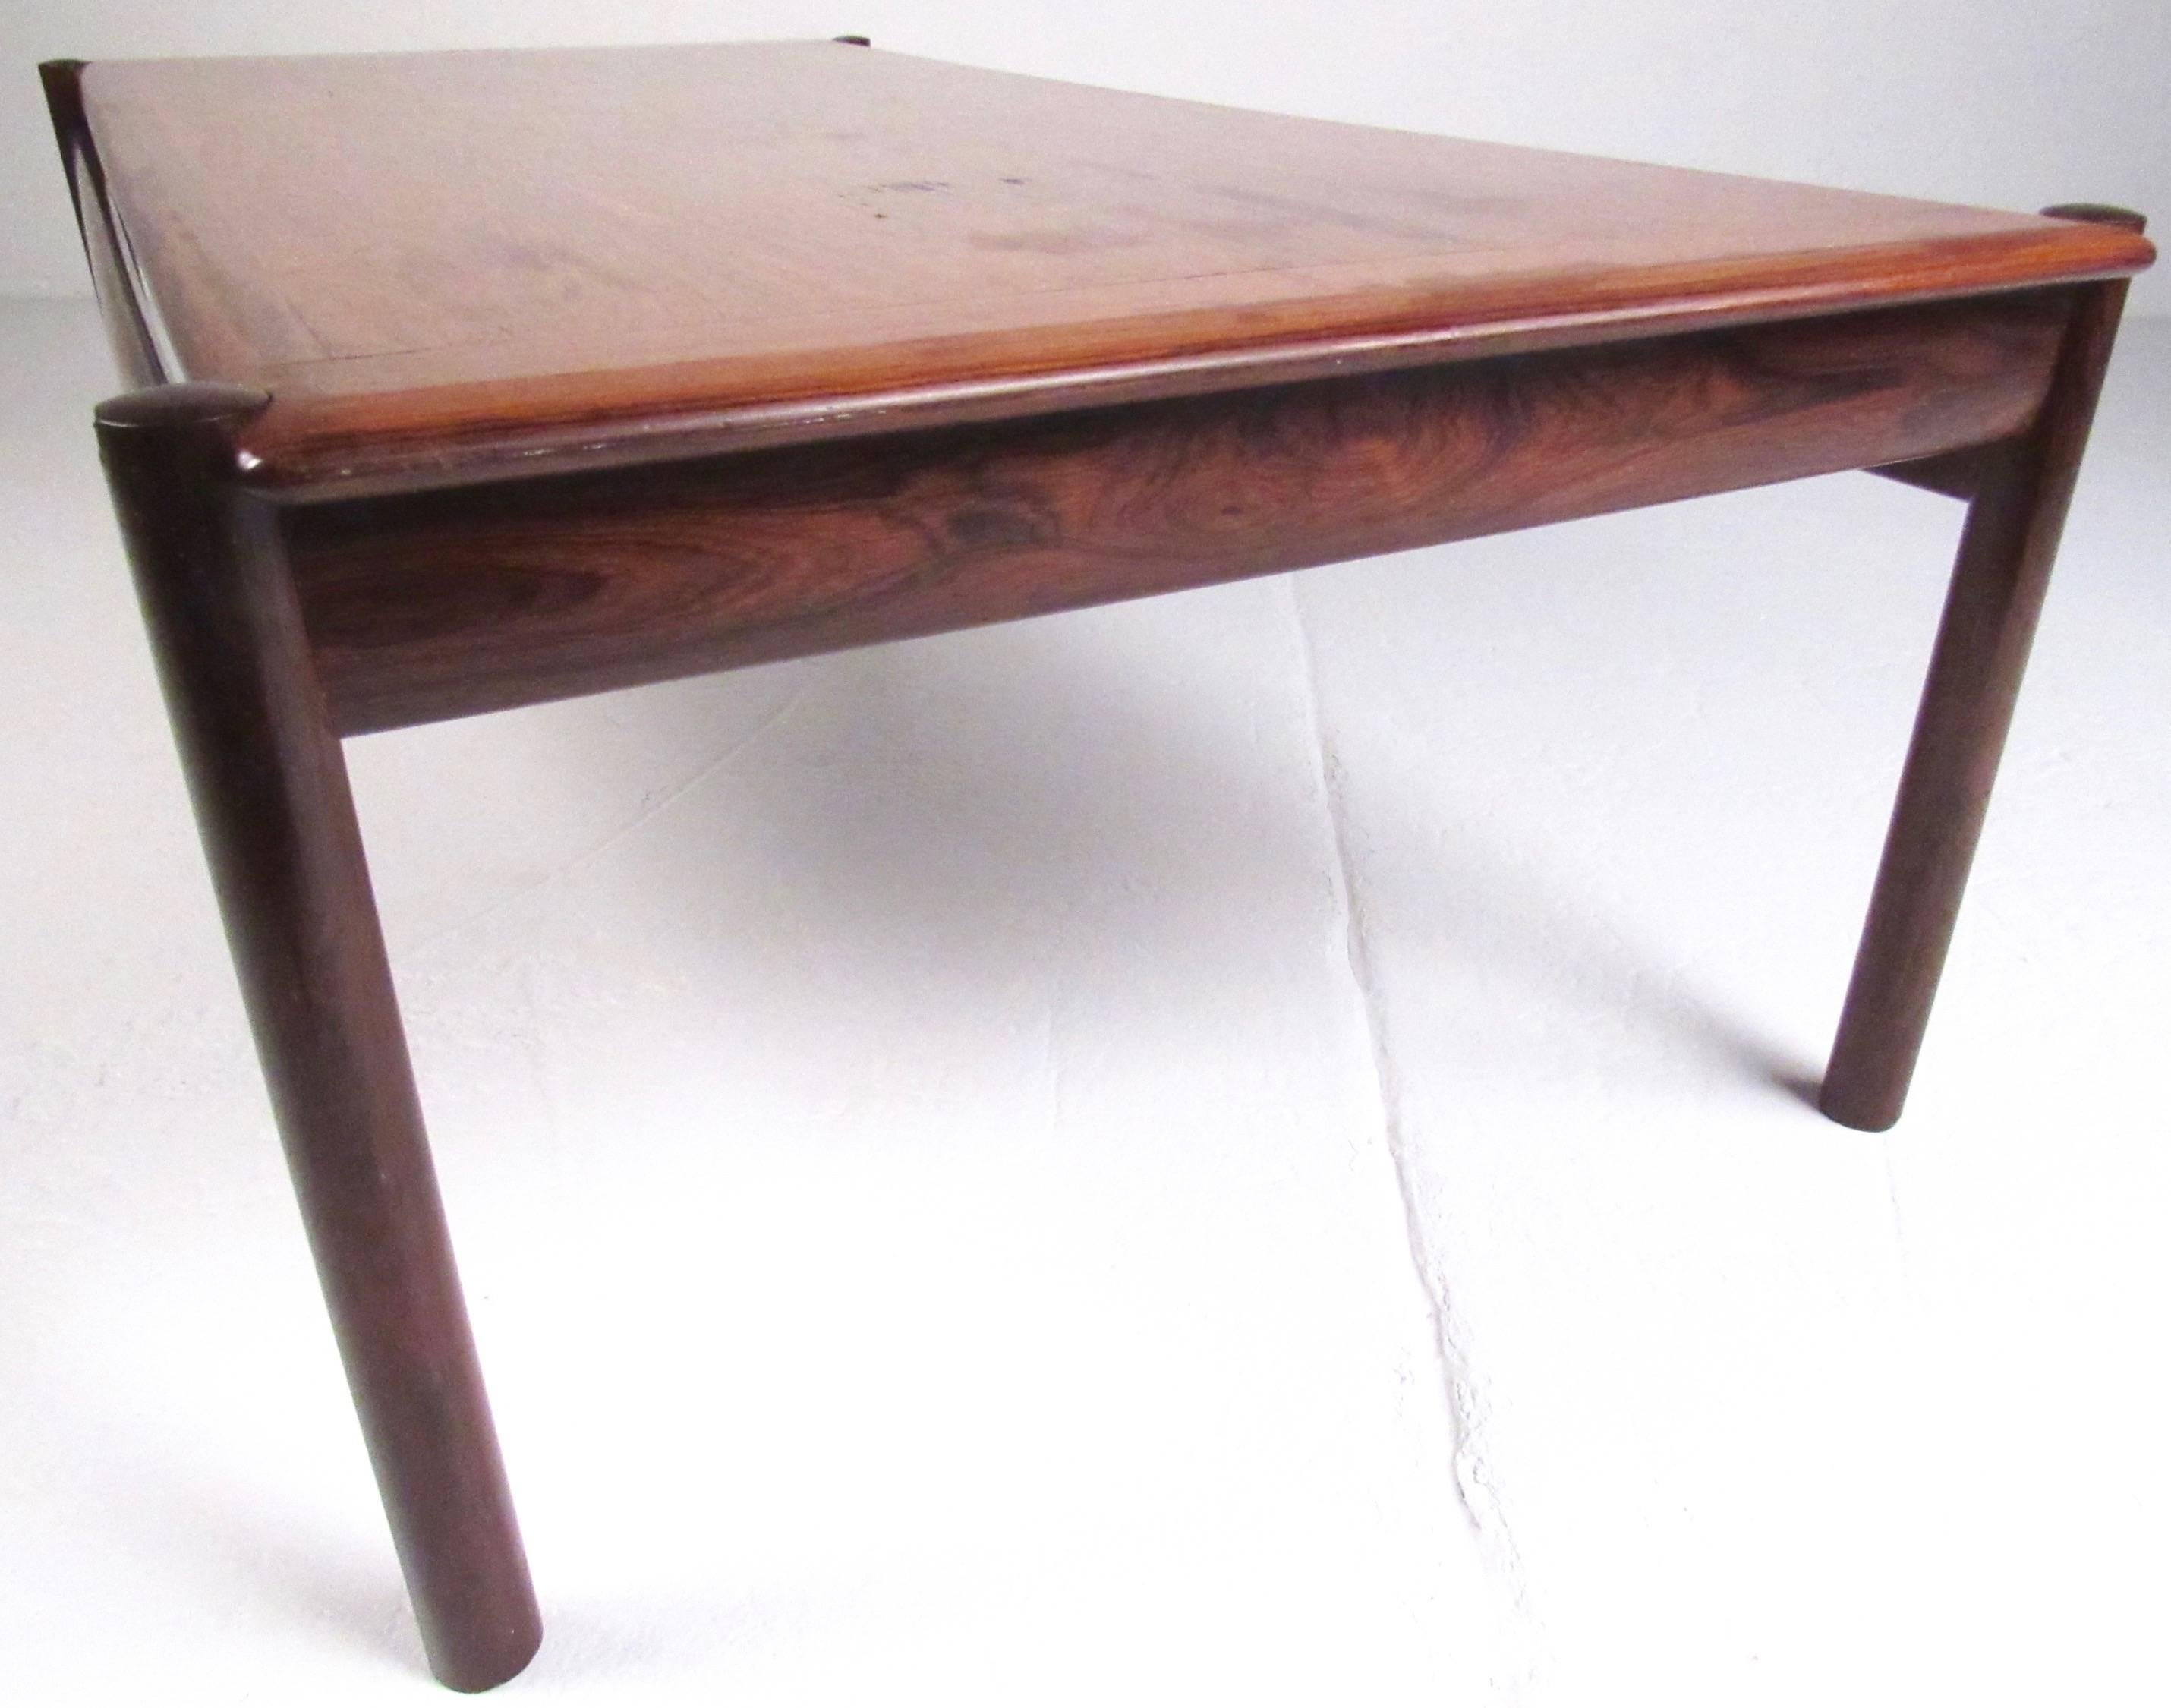 20th Century Mid-Century Modern Rosewood Coffee Table by Sven Ivar Dysthe